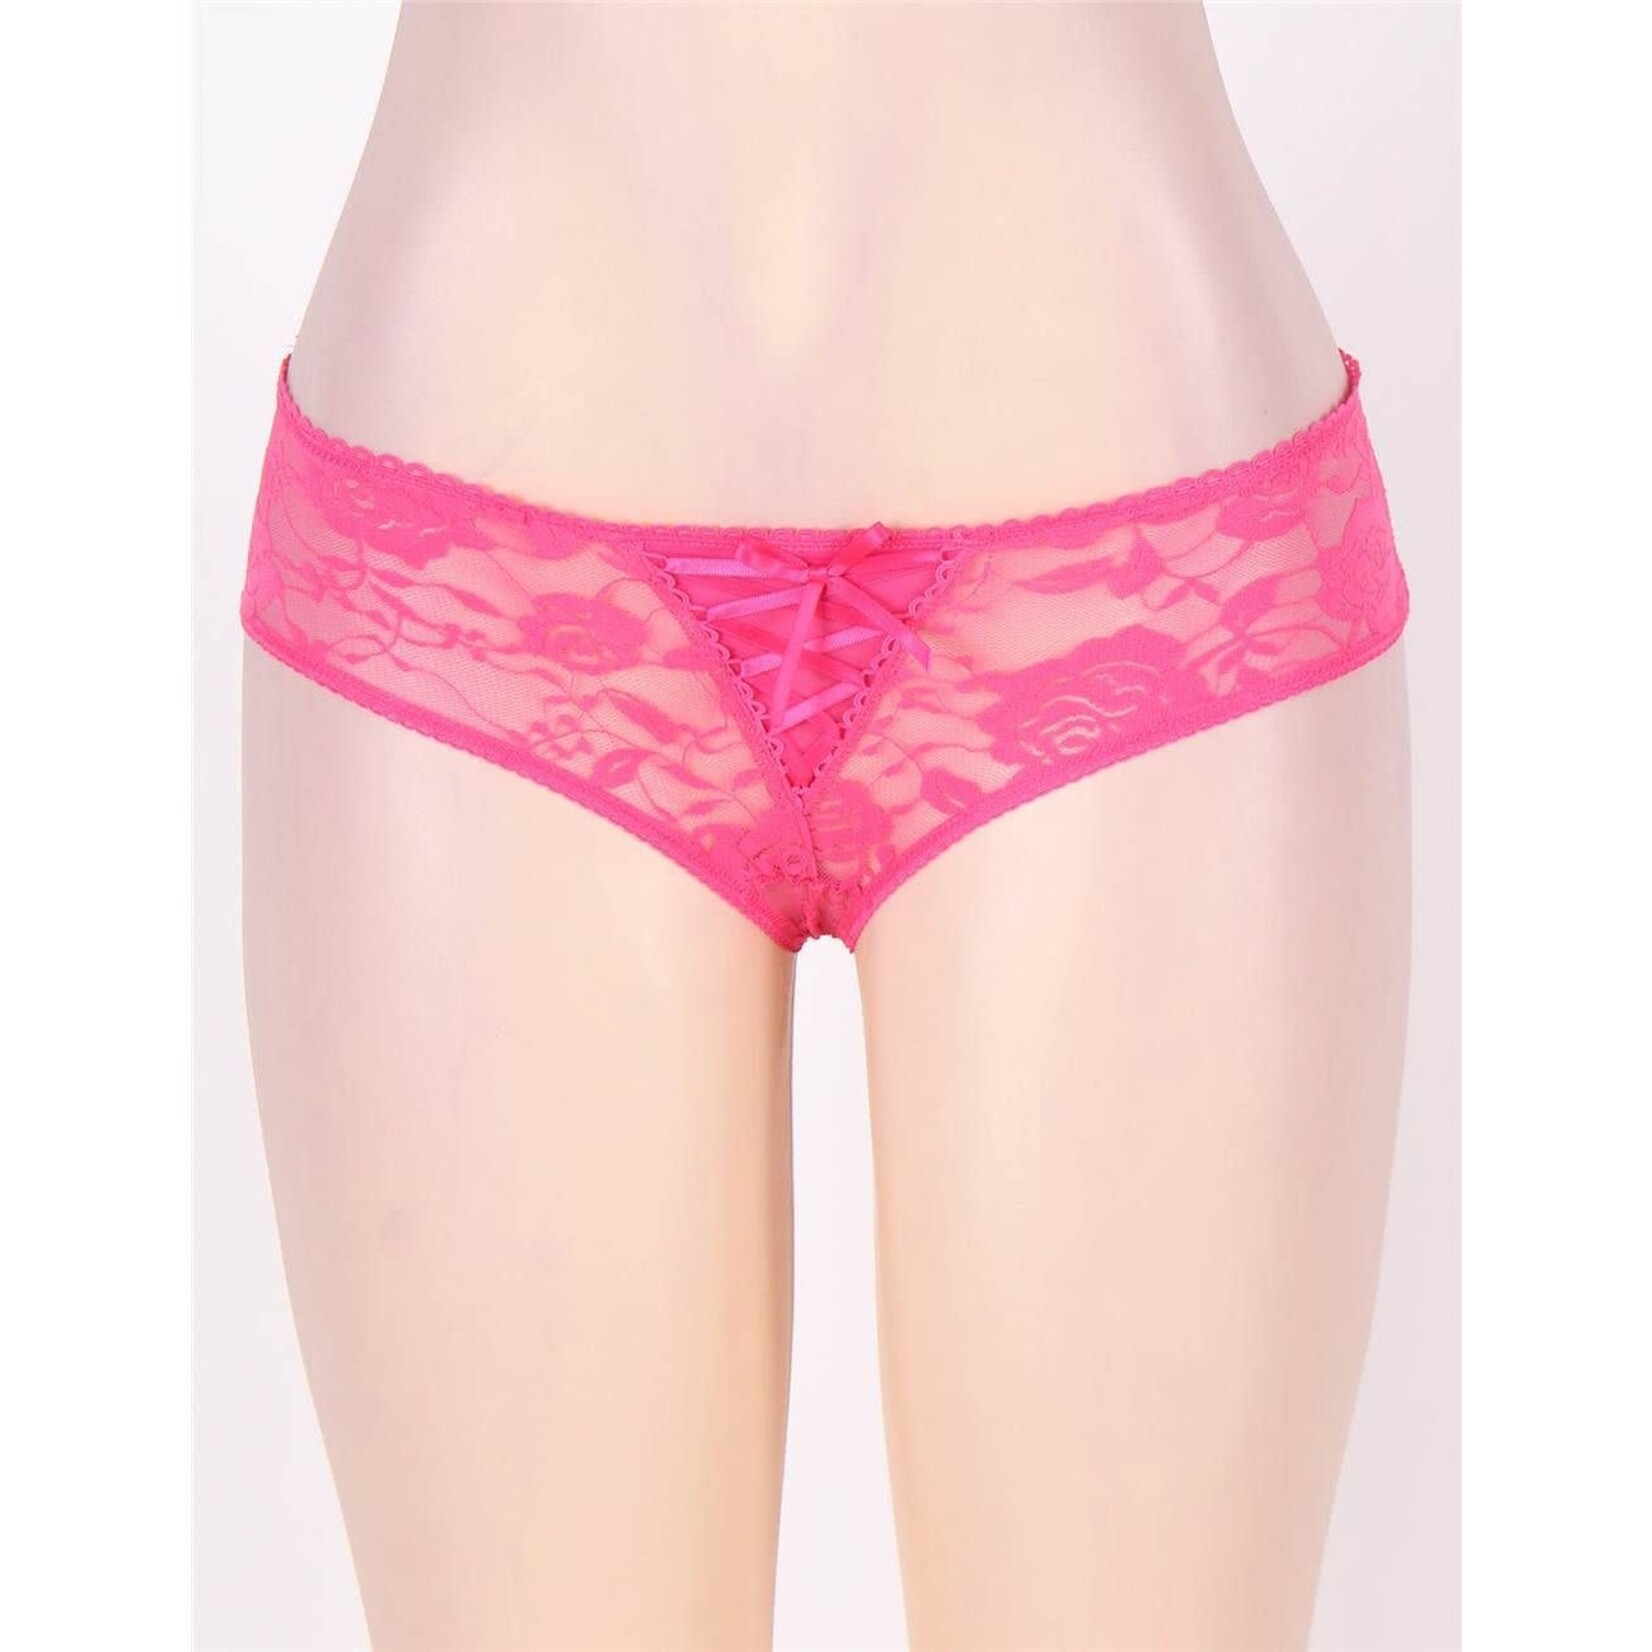 OH YEAH! -  PINK FLORAL LACE STRAPPY OPEN CROTCH PANTY XL-2XL